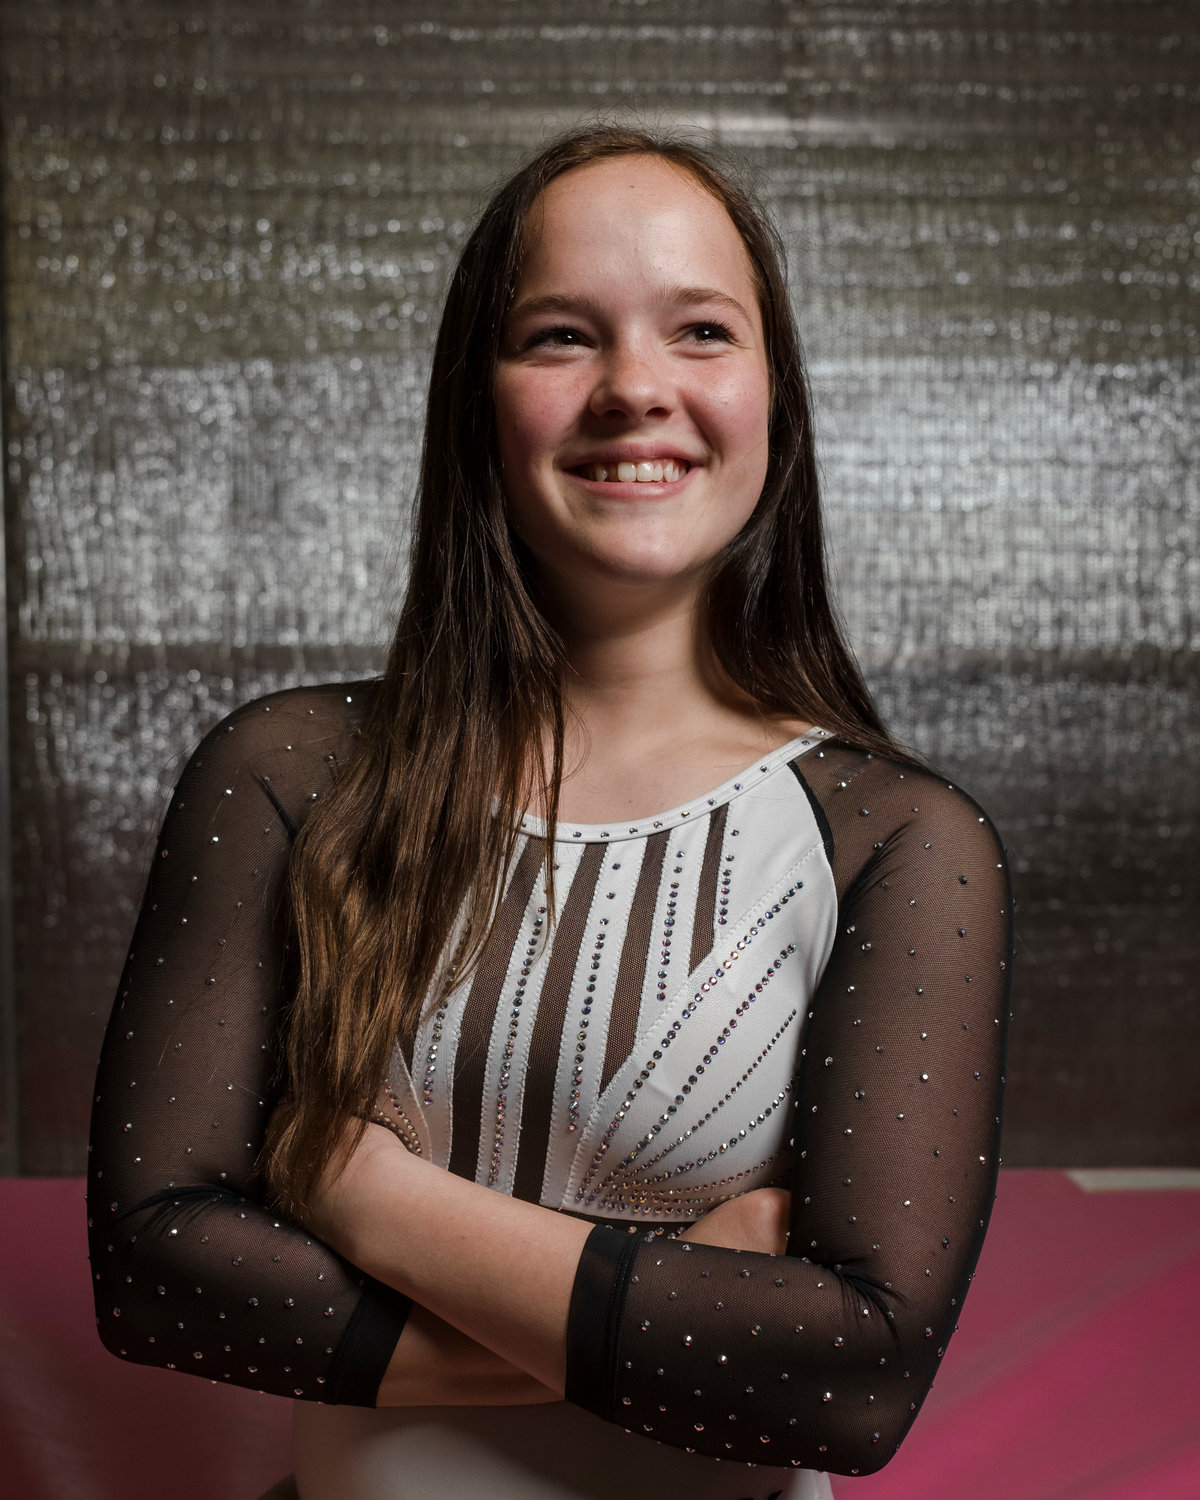 Level 7 highlight: Bella Shumway, 14, is an eighth grader at Fairhope Middle School. She started gymnastics seven years ago and has been competing for six years. Her favorite event is floor because "that is where all her higher skills are and where she feels she shines."